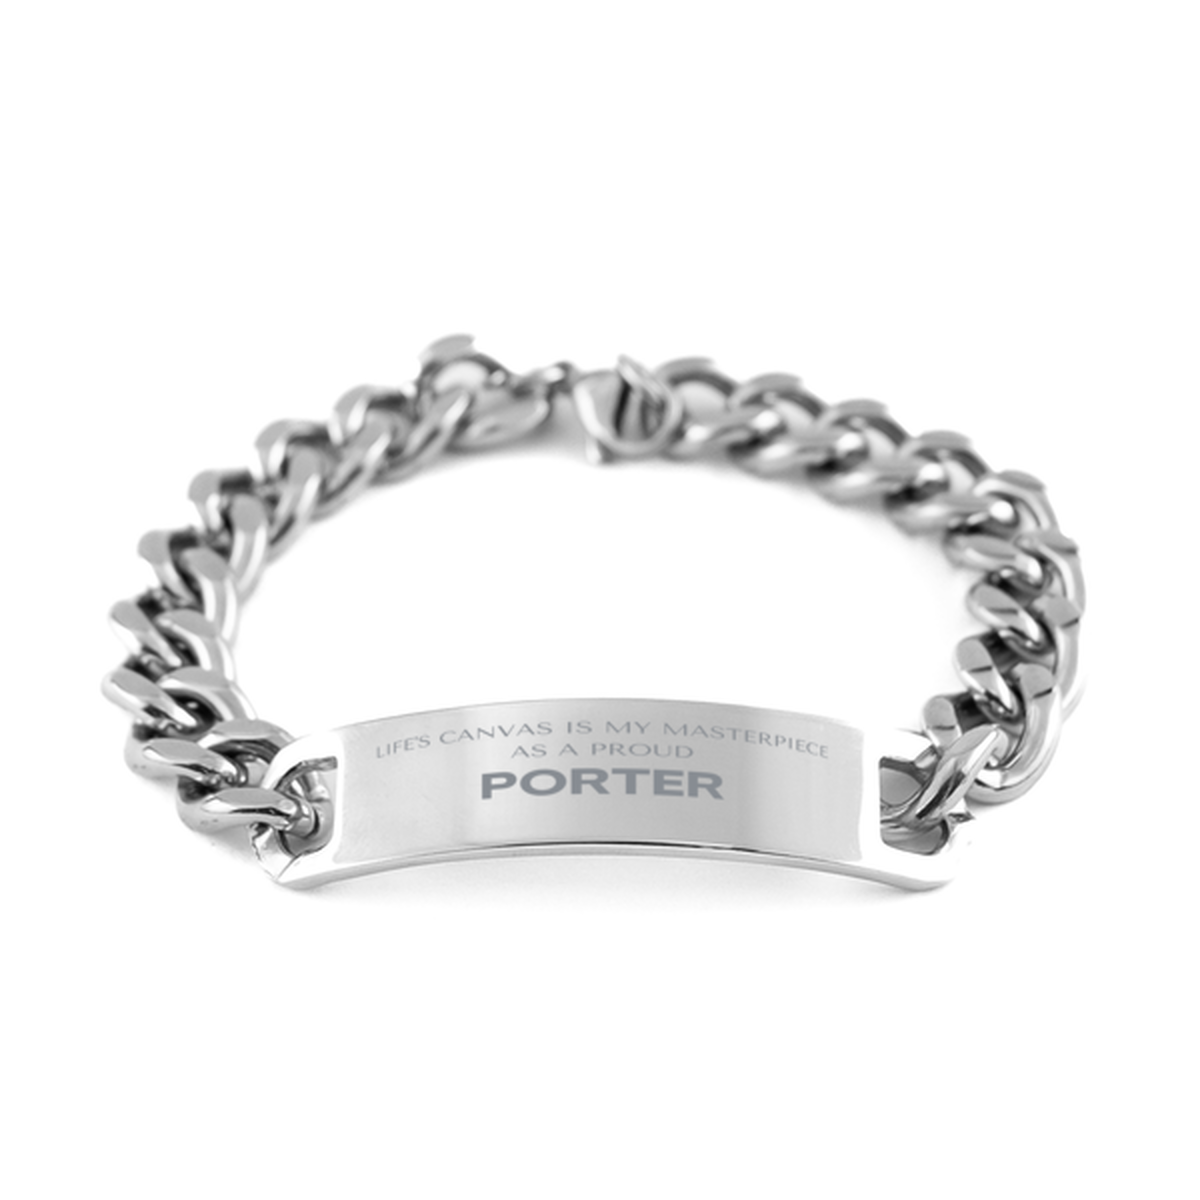 Proud Porter Gifts, Life's canvas is my masterpiece, Epic Birthday Christmas Unique Cuban Chain Stainless Steel Bracelet For Porter, Coworkers, Men, Women, Friends